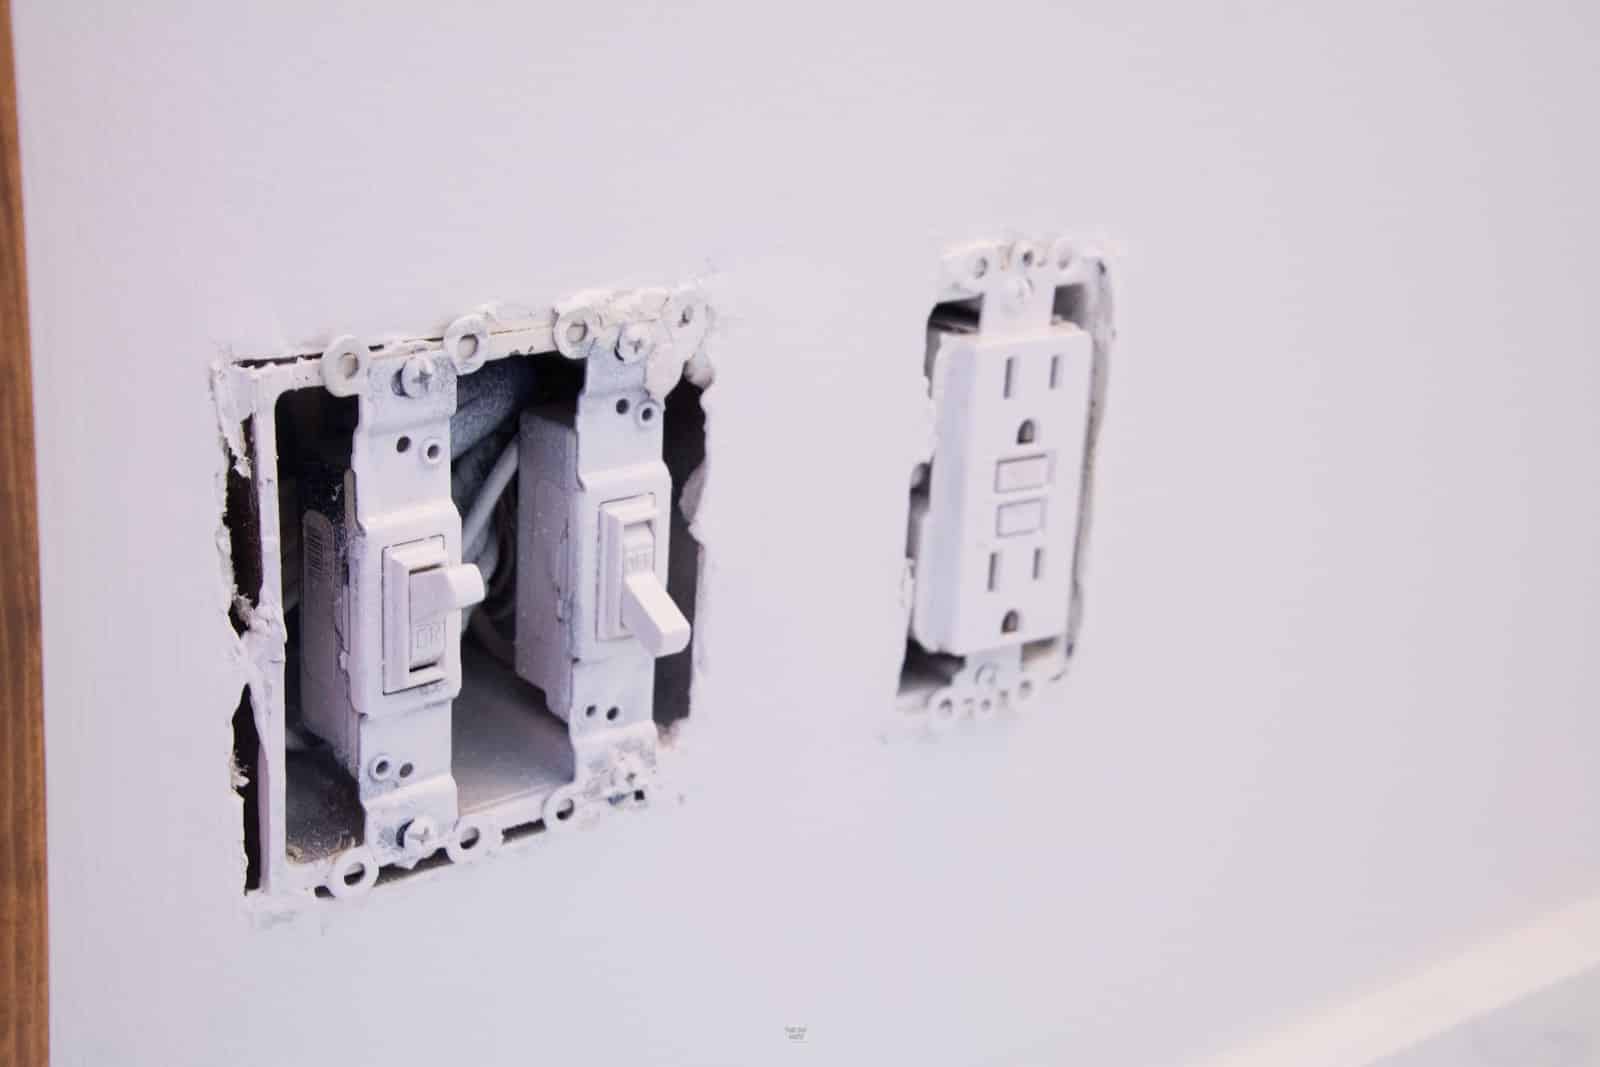 white switches and outlets without covers.